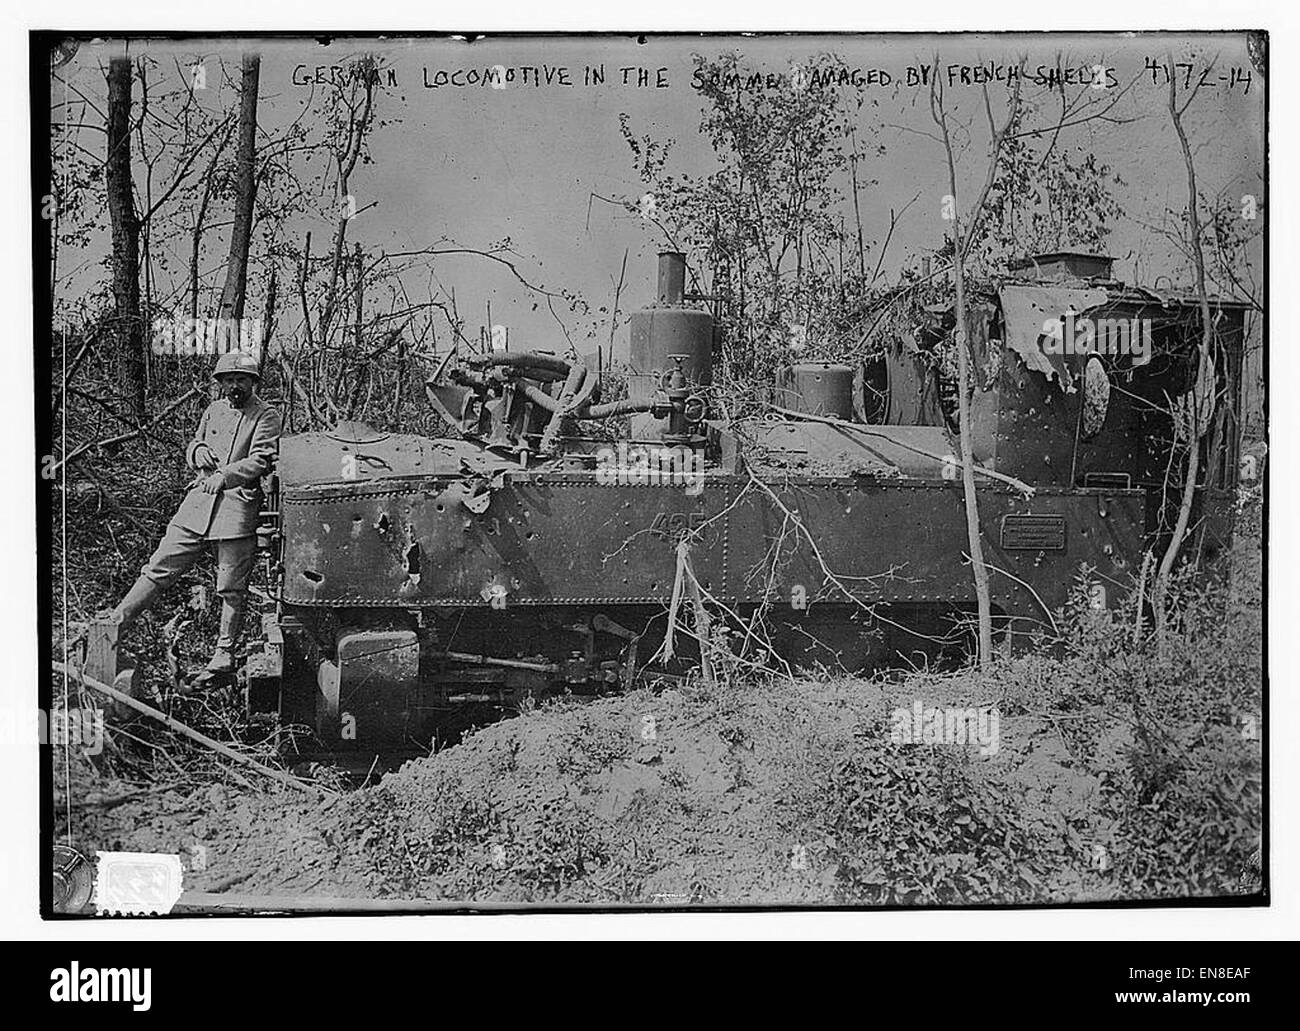 German locomotive in the Somme damaged by French shells Stock Photo